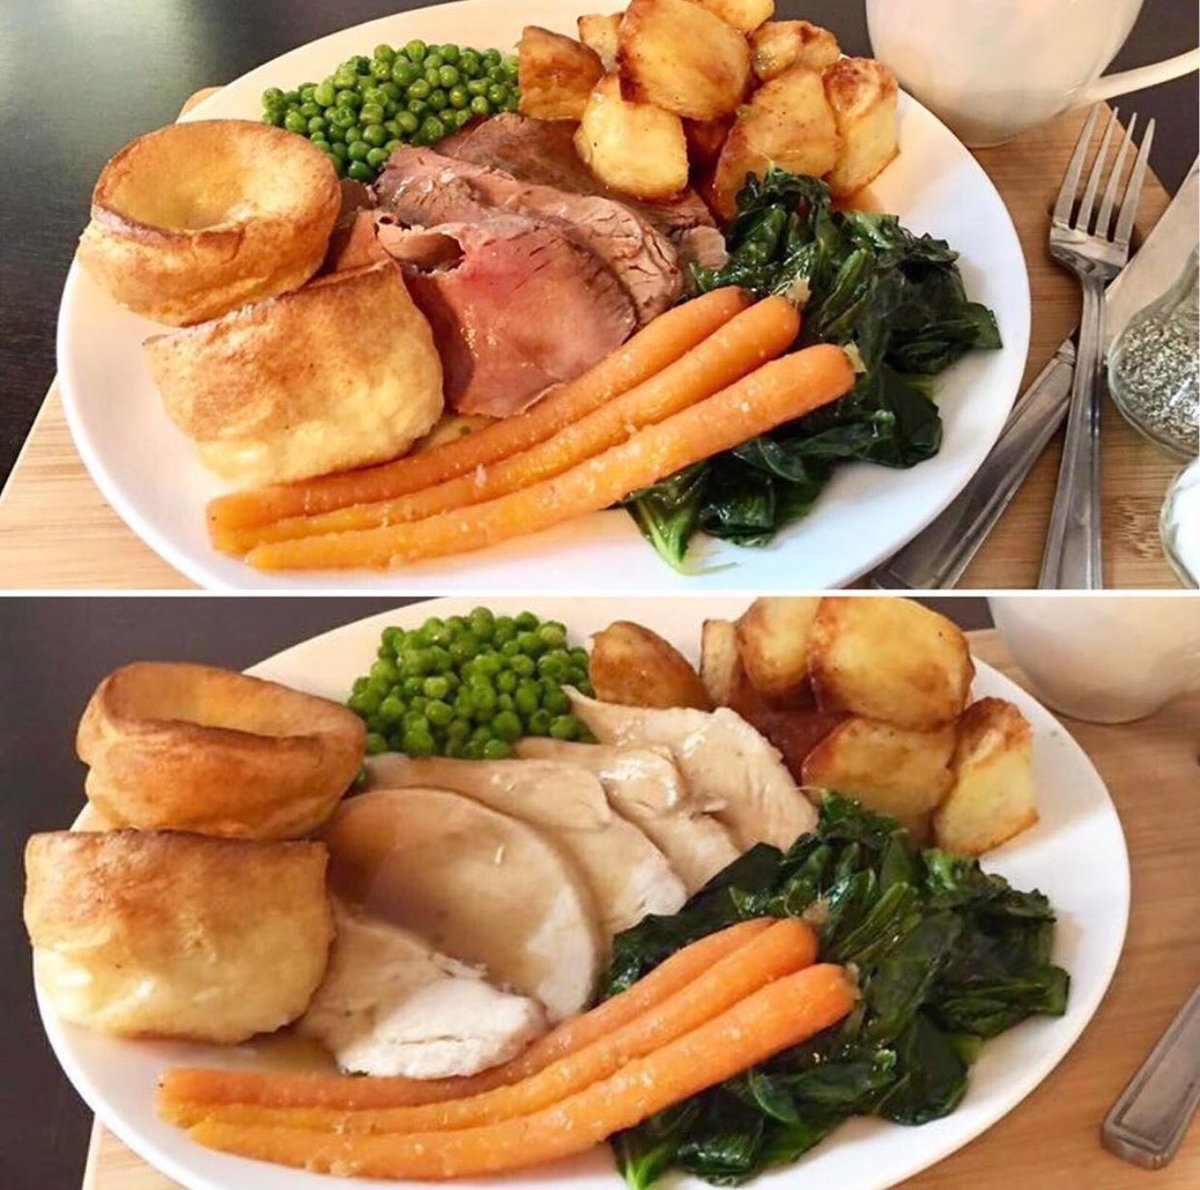 Our chef is back in town and we’ll be relaunching our roast dinners on Sundays very soon. We’ll have a new vegan option too.